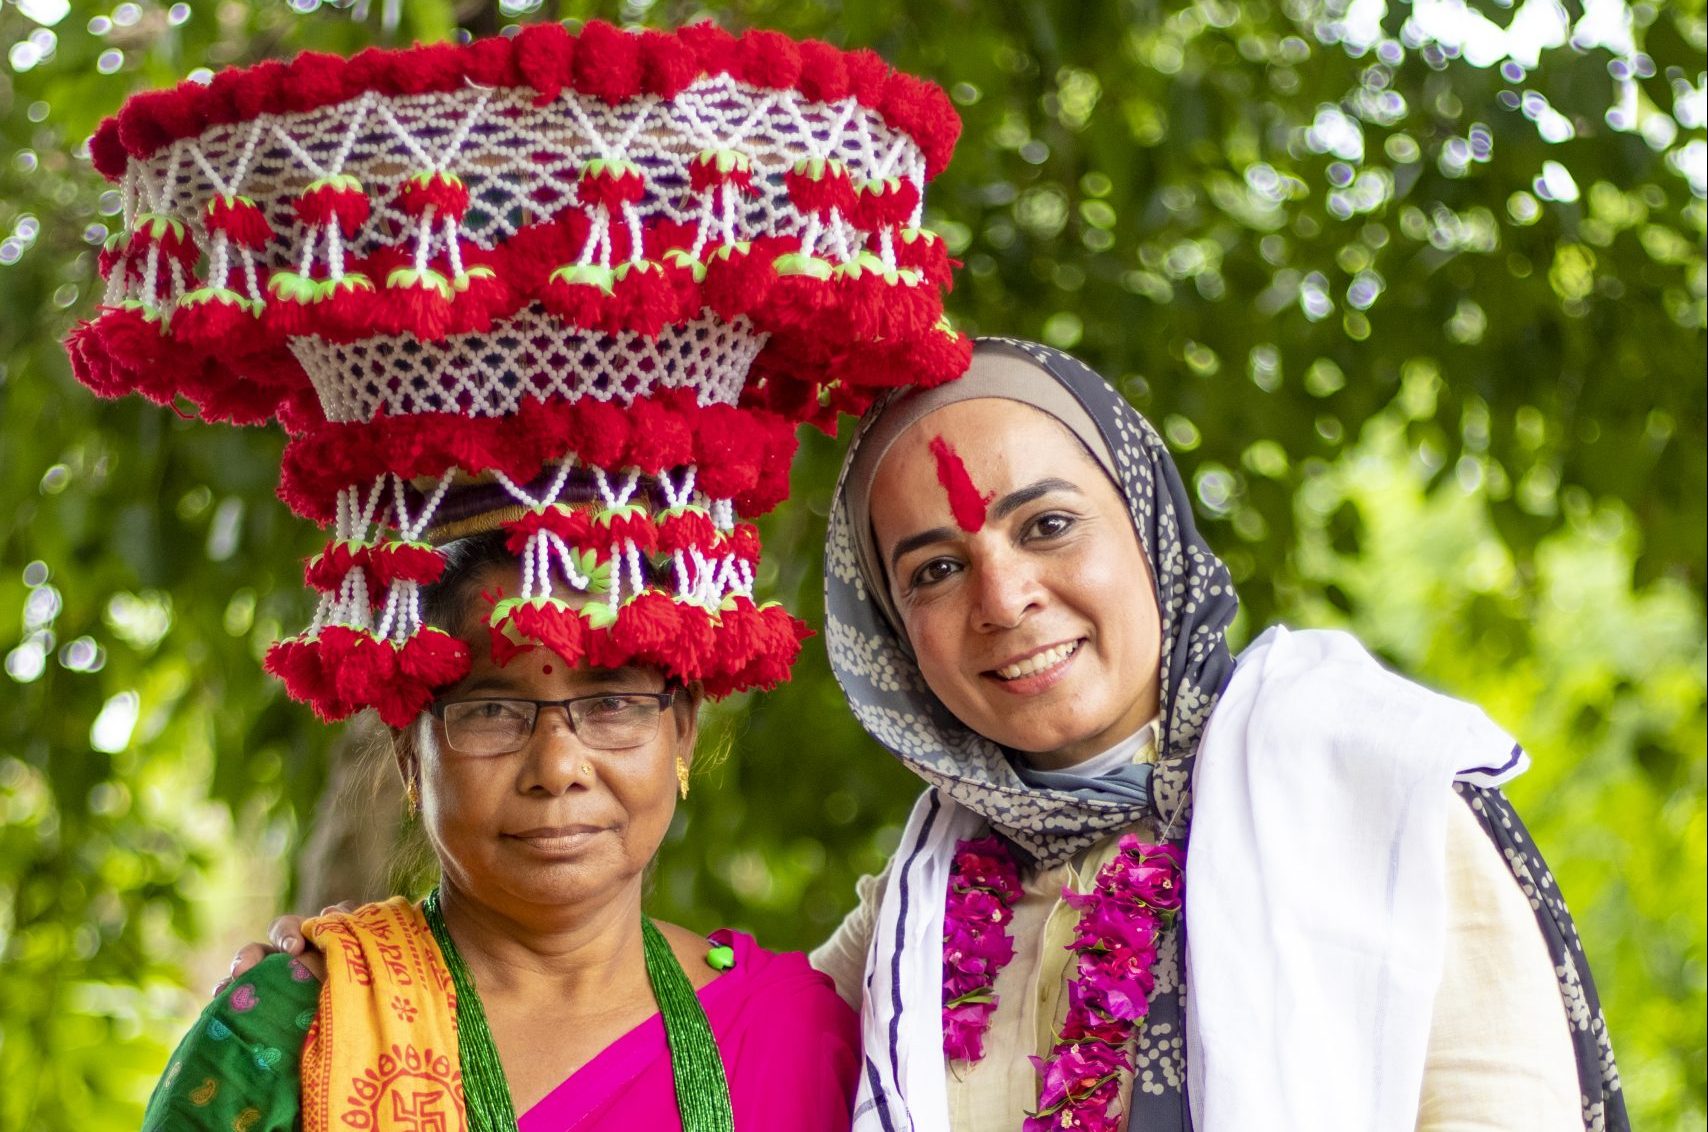 Two standing, smiling women - one is Nepali and wears a very large tassled hat, the other a headscarf